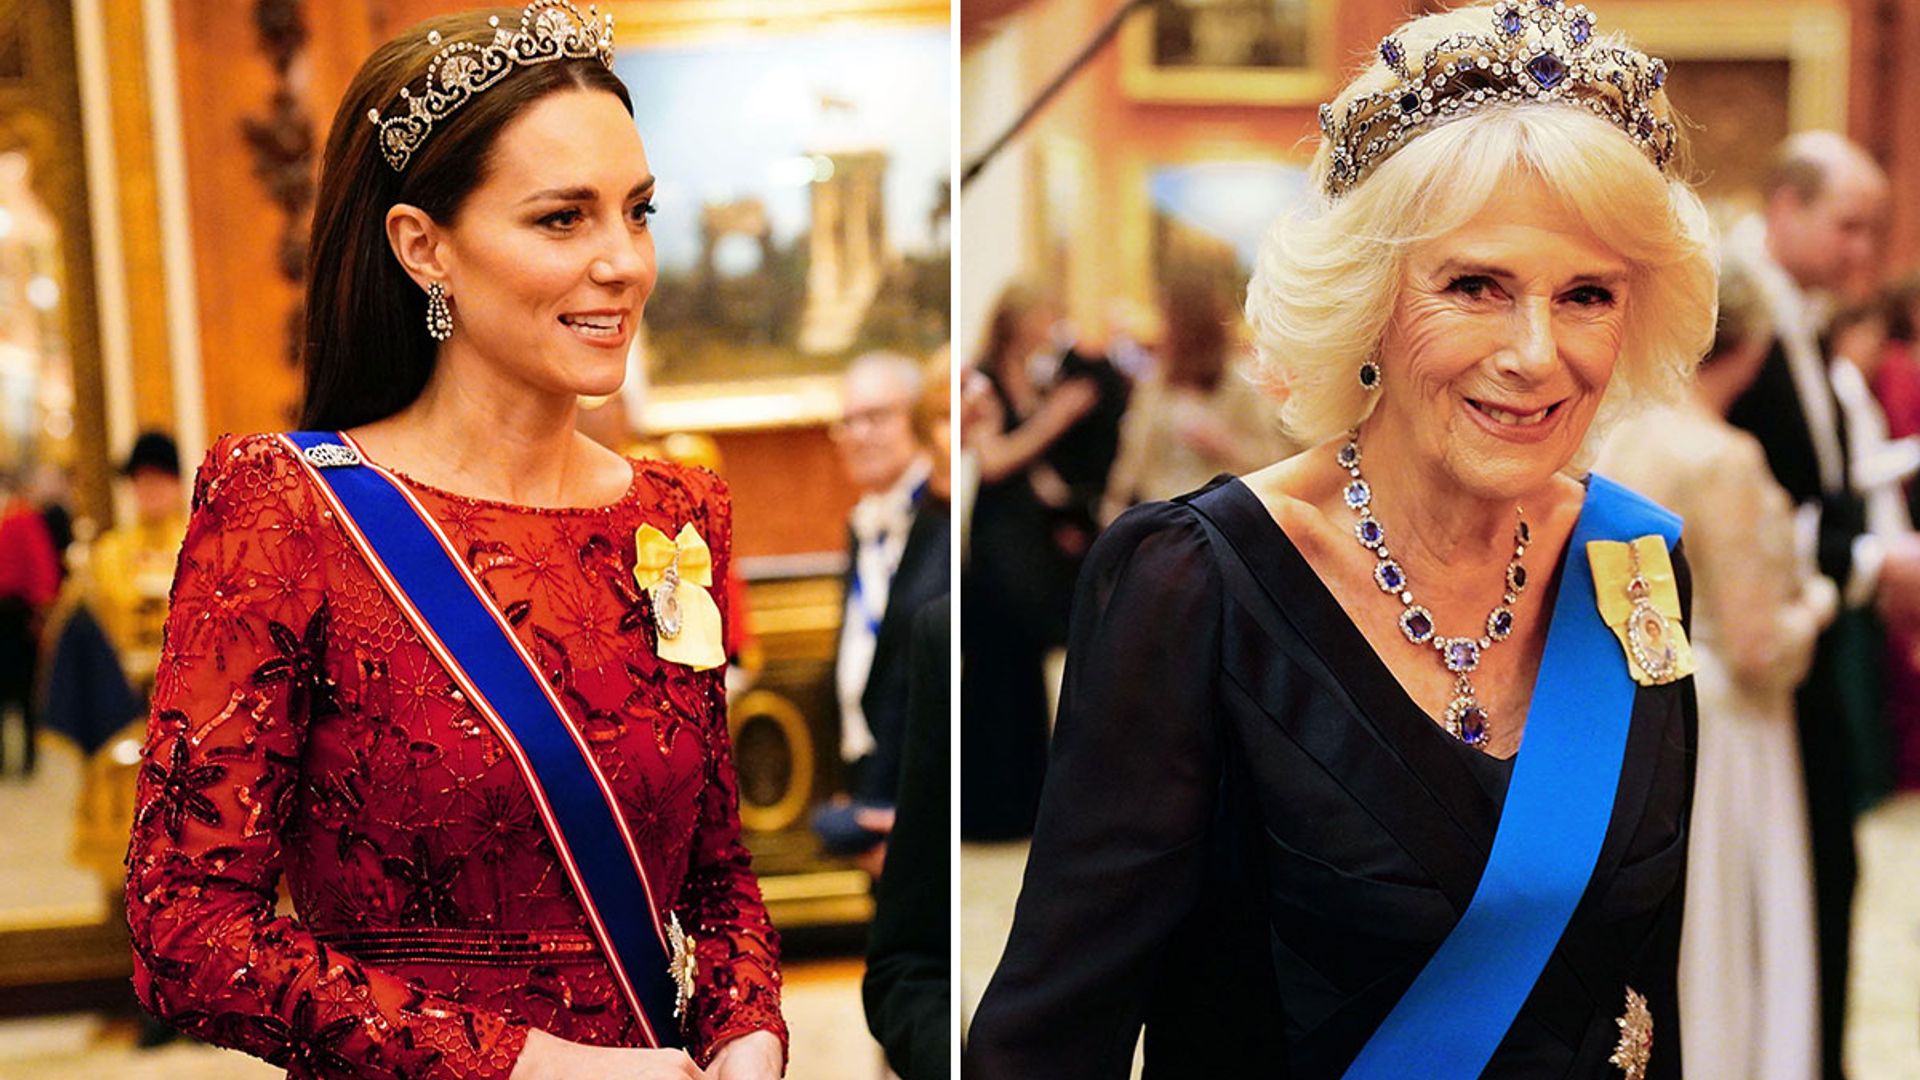 Kate Middleton and Camilla sparkle in tiaras hours before Harry and Meghan’s red carpet appearance